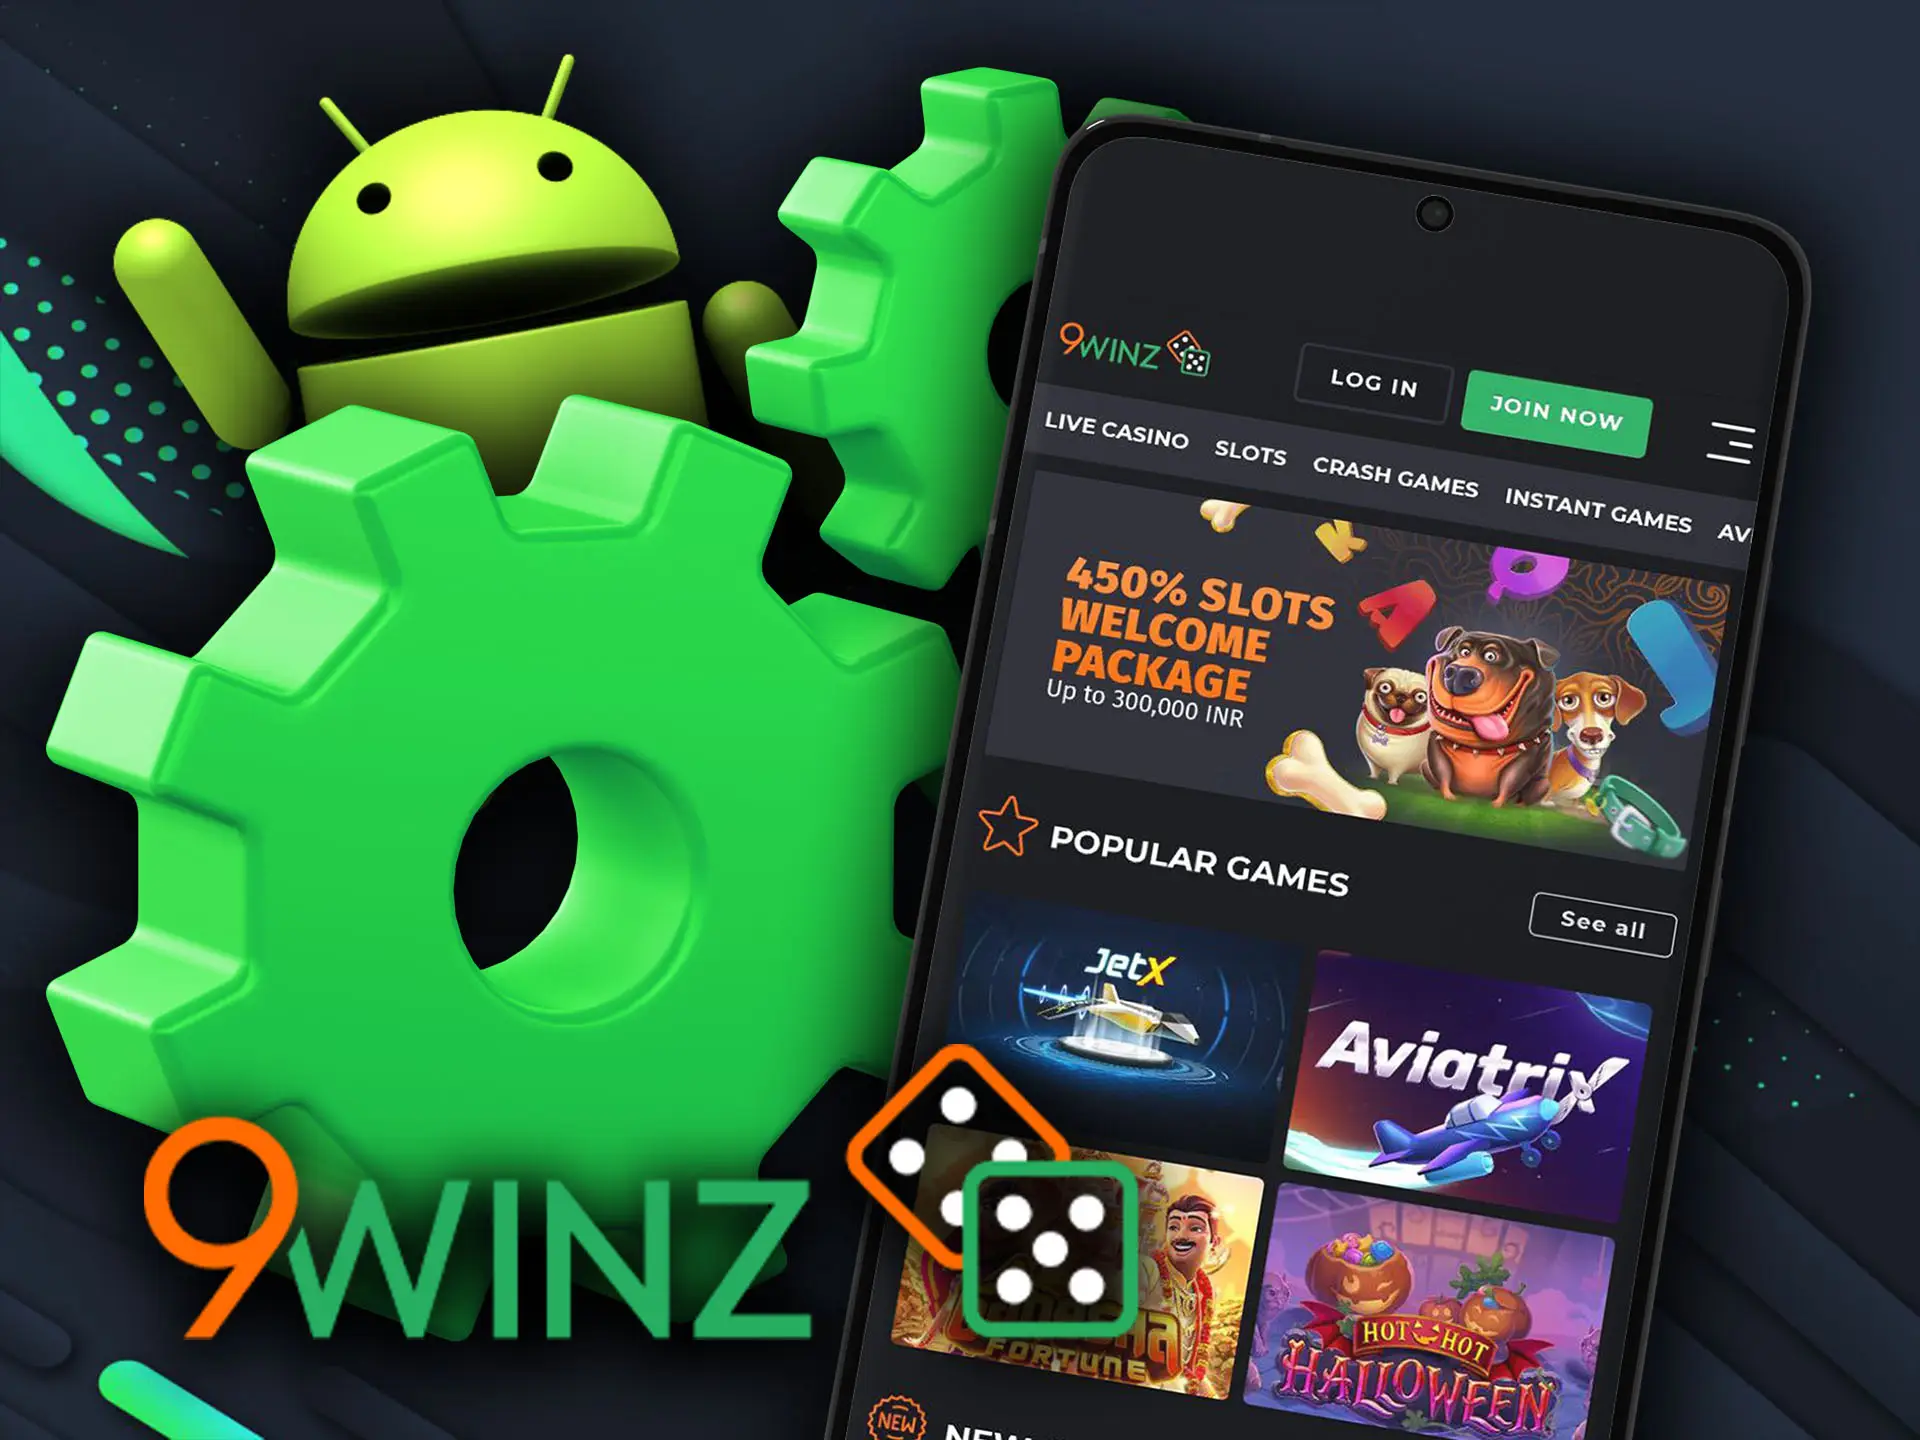 9winz android app has low system requirements and easy to download and use.